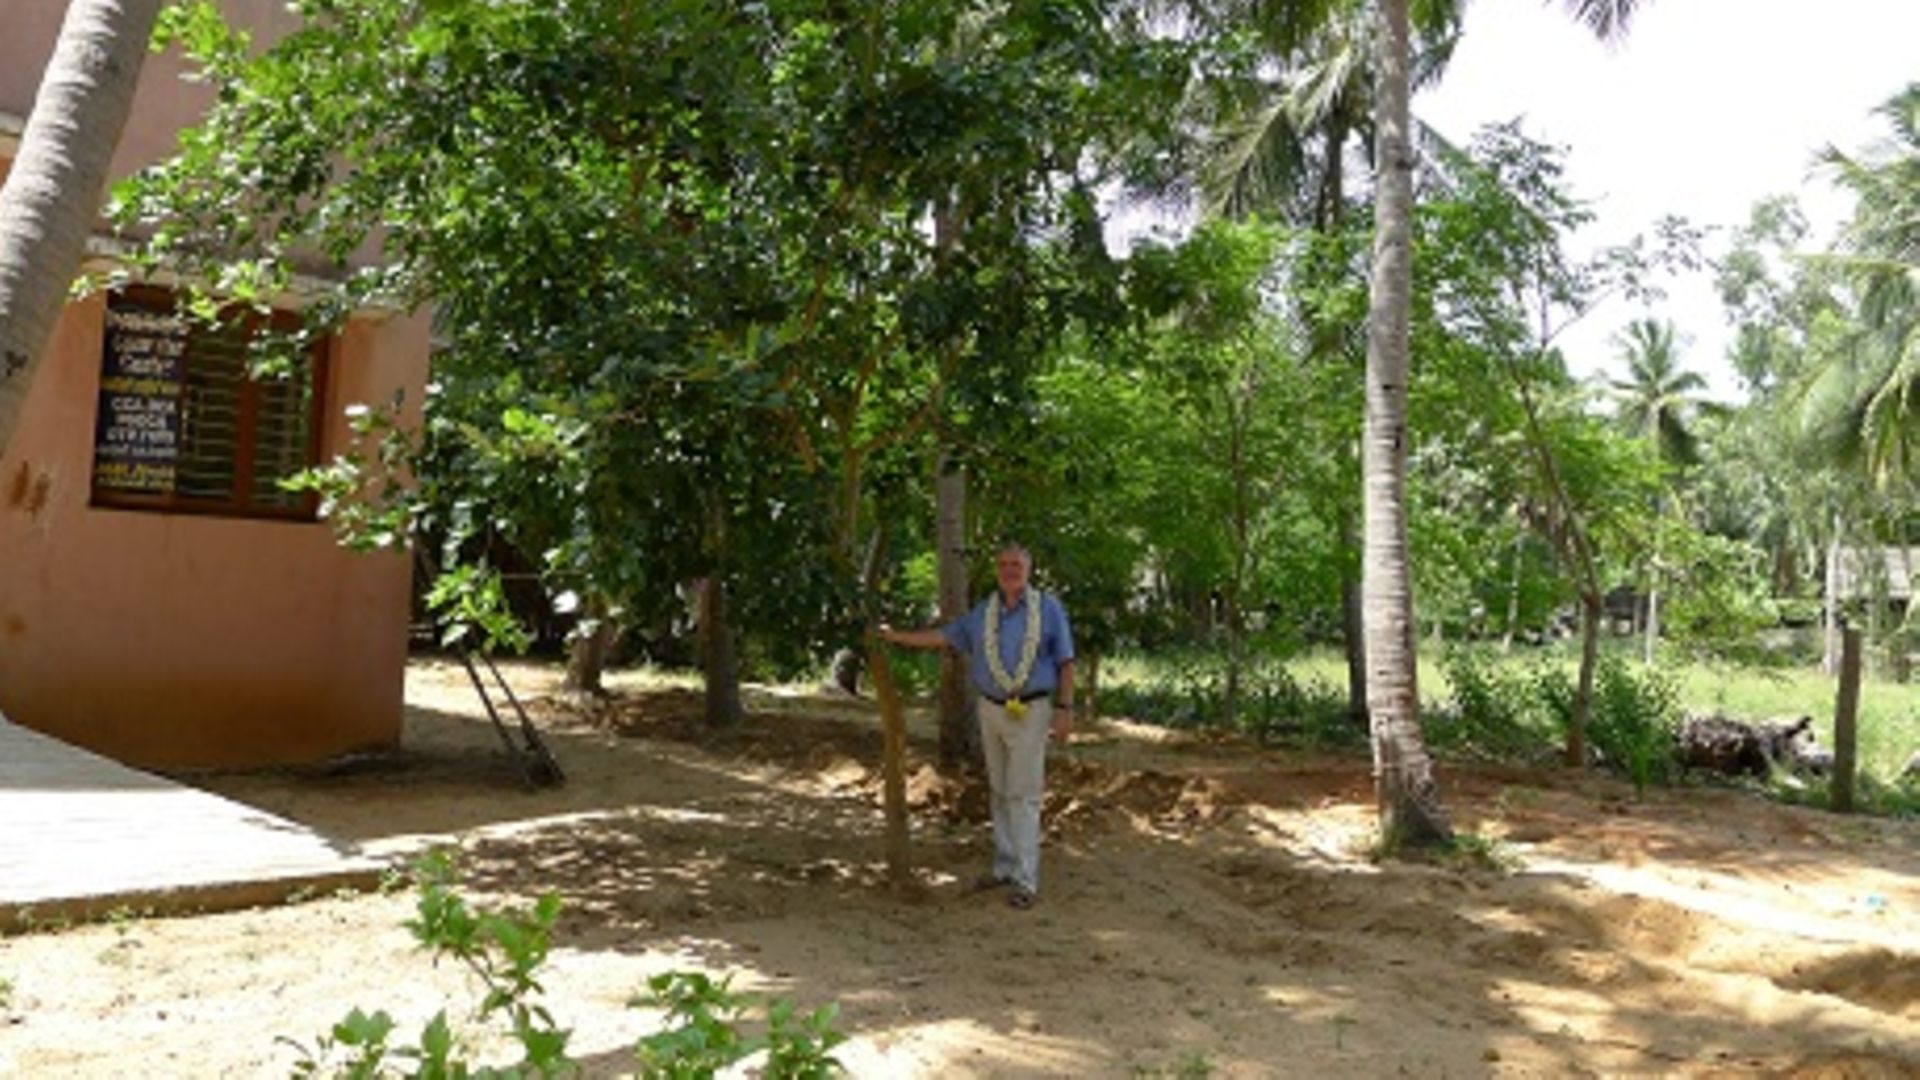 Reimar Heucher planted a small tree when the school opened in 2006.